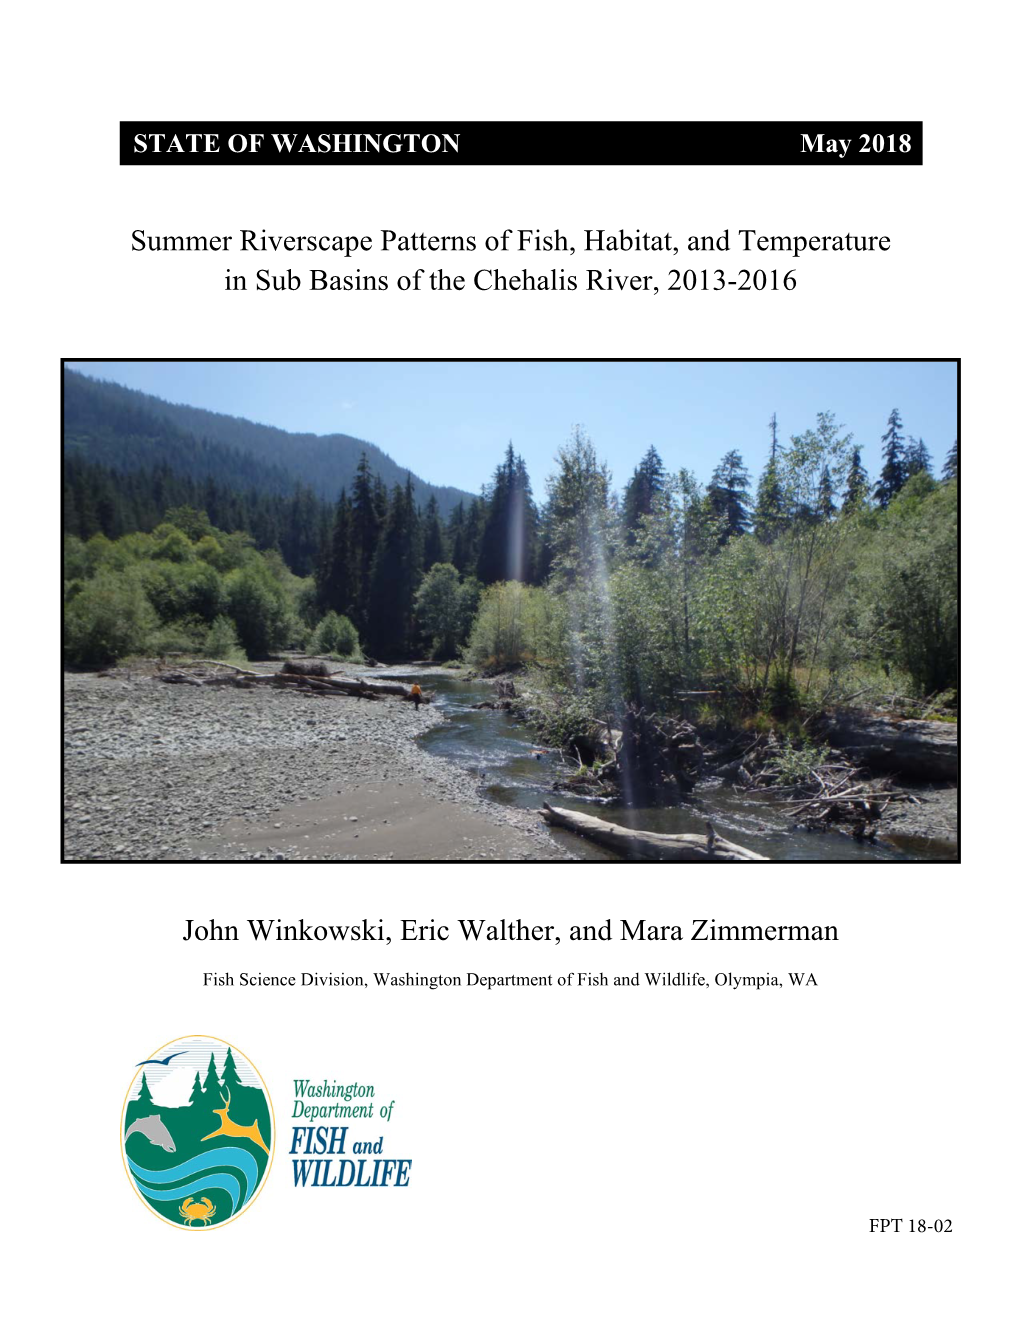 Summer Riverscape Patterns of Fish, Habitat, and Temperature in Sub Basins of the Chehalis River, 2013-2016